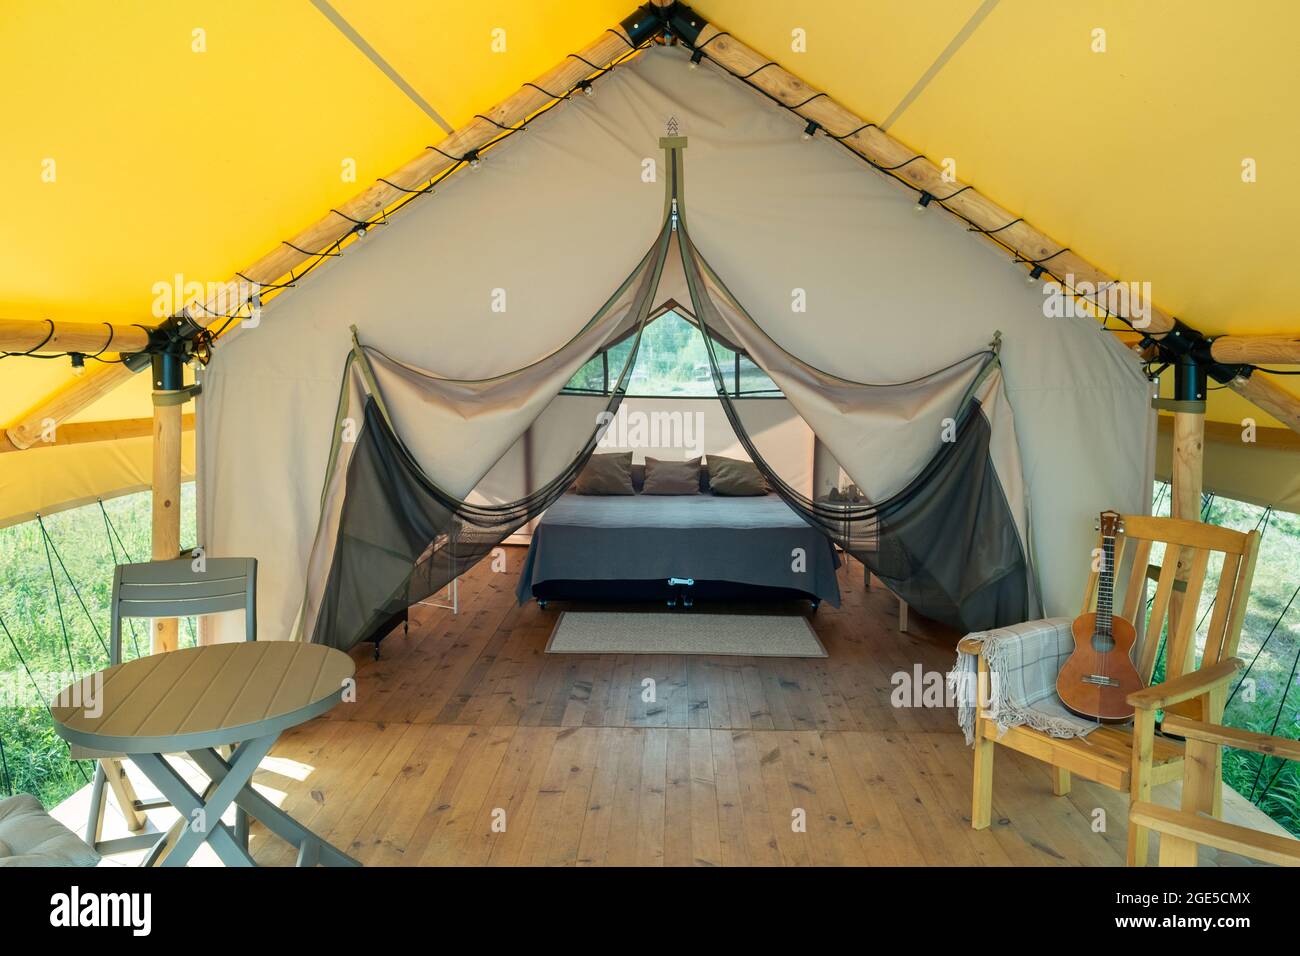 Interior of luxurious family glamping house with bed, table and chairs Stock Photo